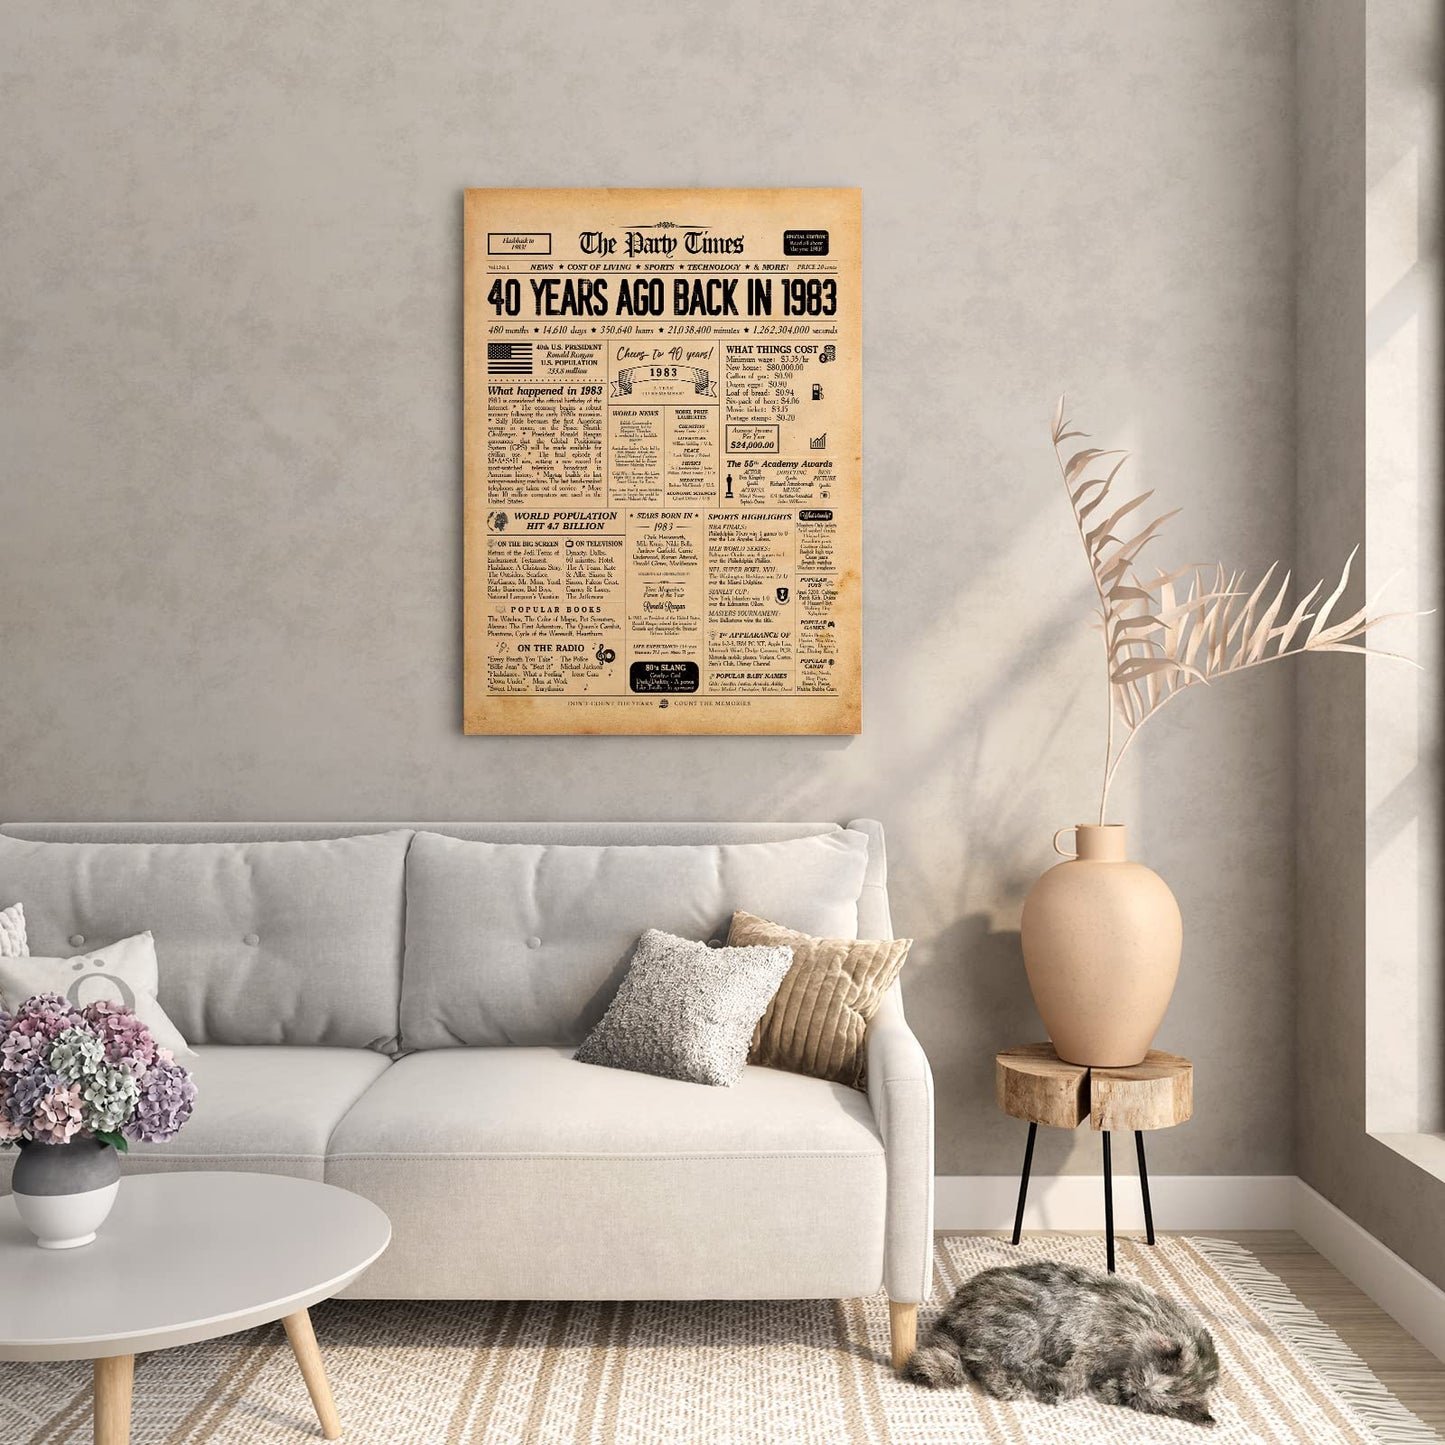 40th Birthday Newspaper Wall Art Canvas Poster Decorative with Frame (11.5×15 inch), Back in 1983 Print 1983 birthday poster Vintage 40th Birthday Decorations Poster for Home Wall Decor, SRZT40S